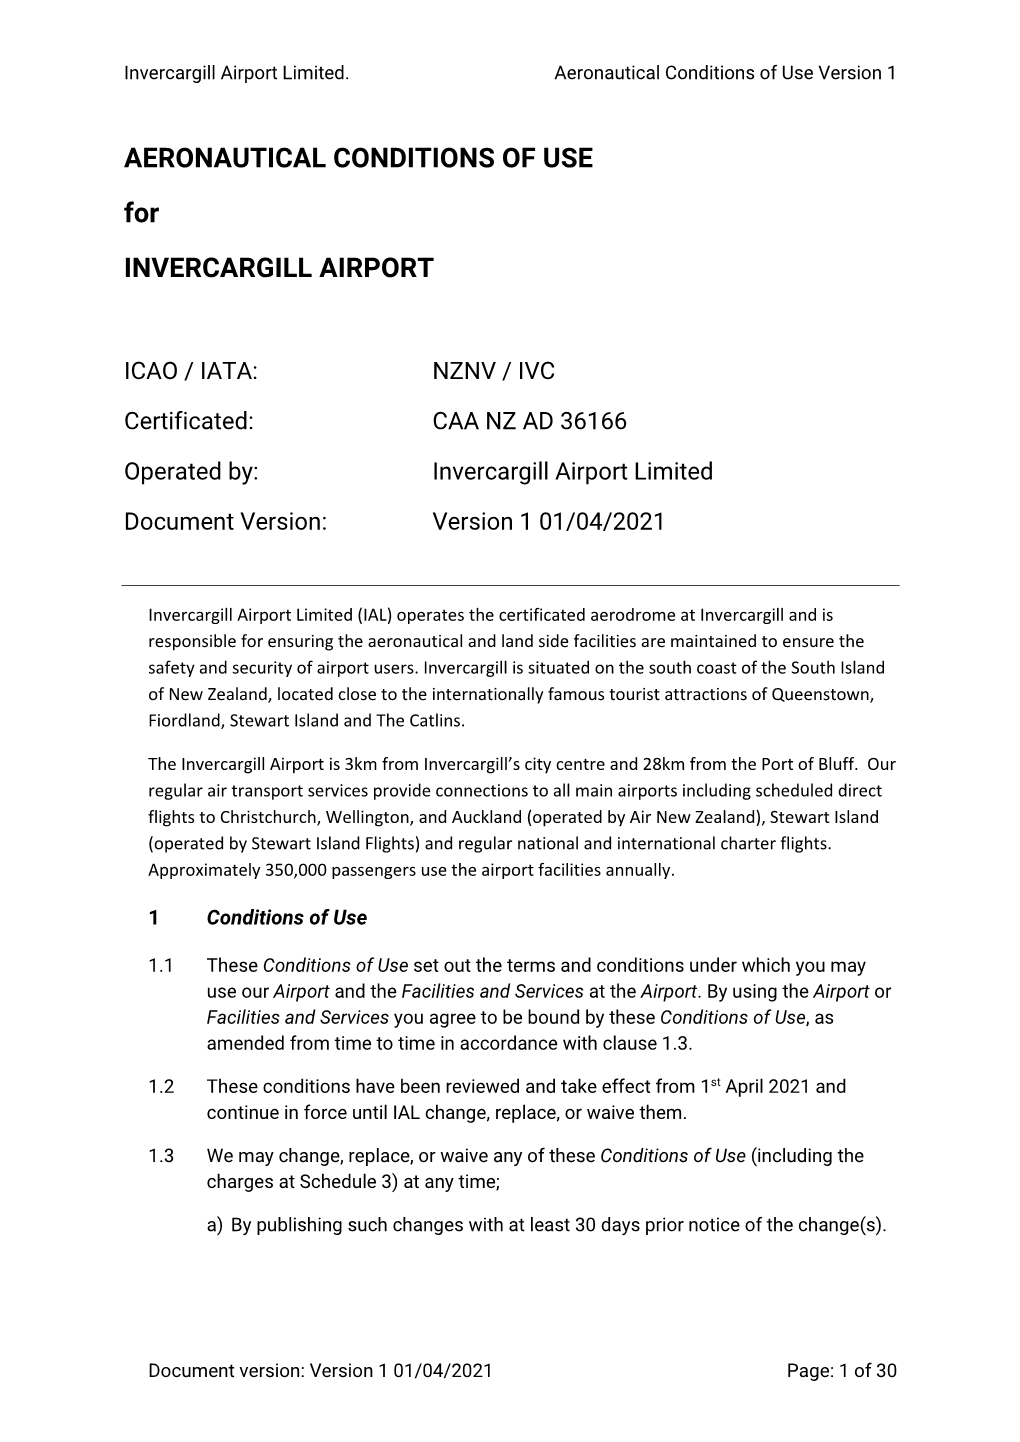 AERONAUTICAL CONDITIONS of USE for INVERCARGILL AIRPORT